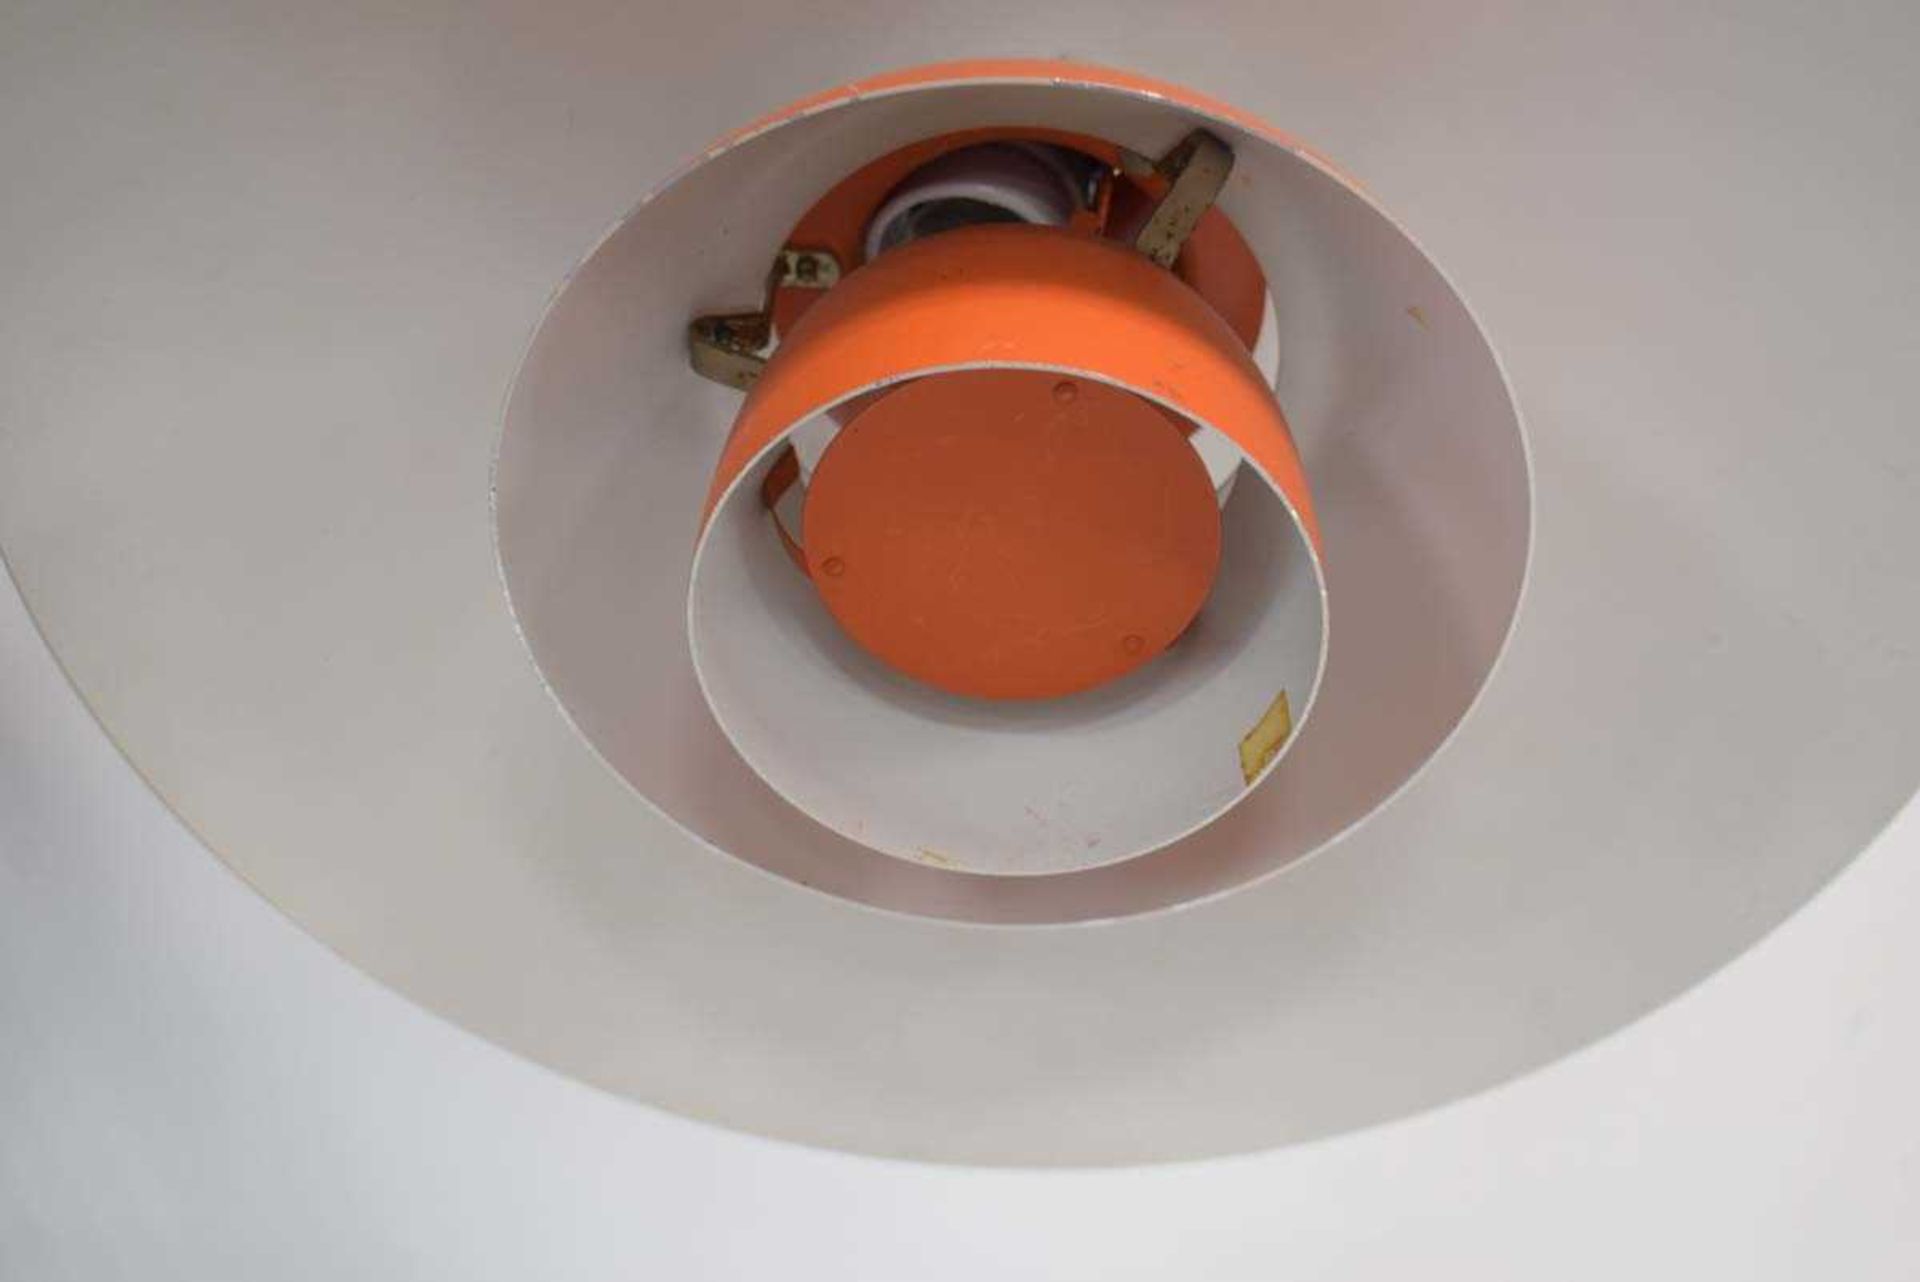 Louis Poulsen for Poul Henningsen, a pair of 1960's Danish 1st-Edition PH4 pendant lamps in - Image 6 of 8